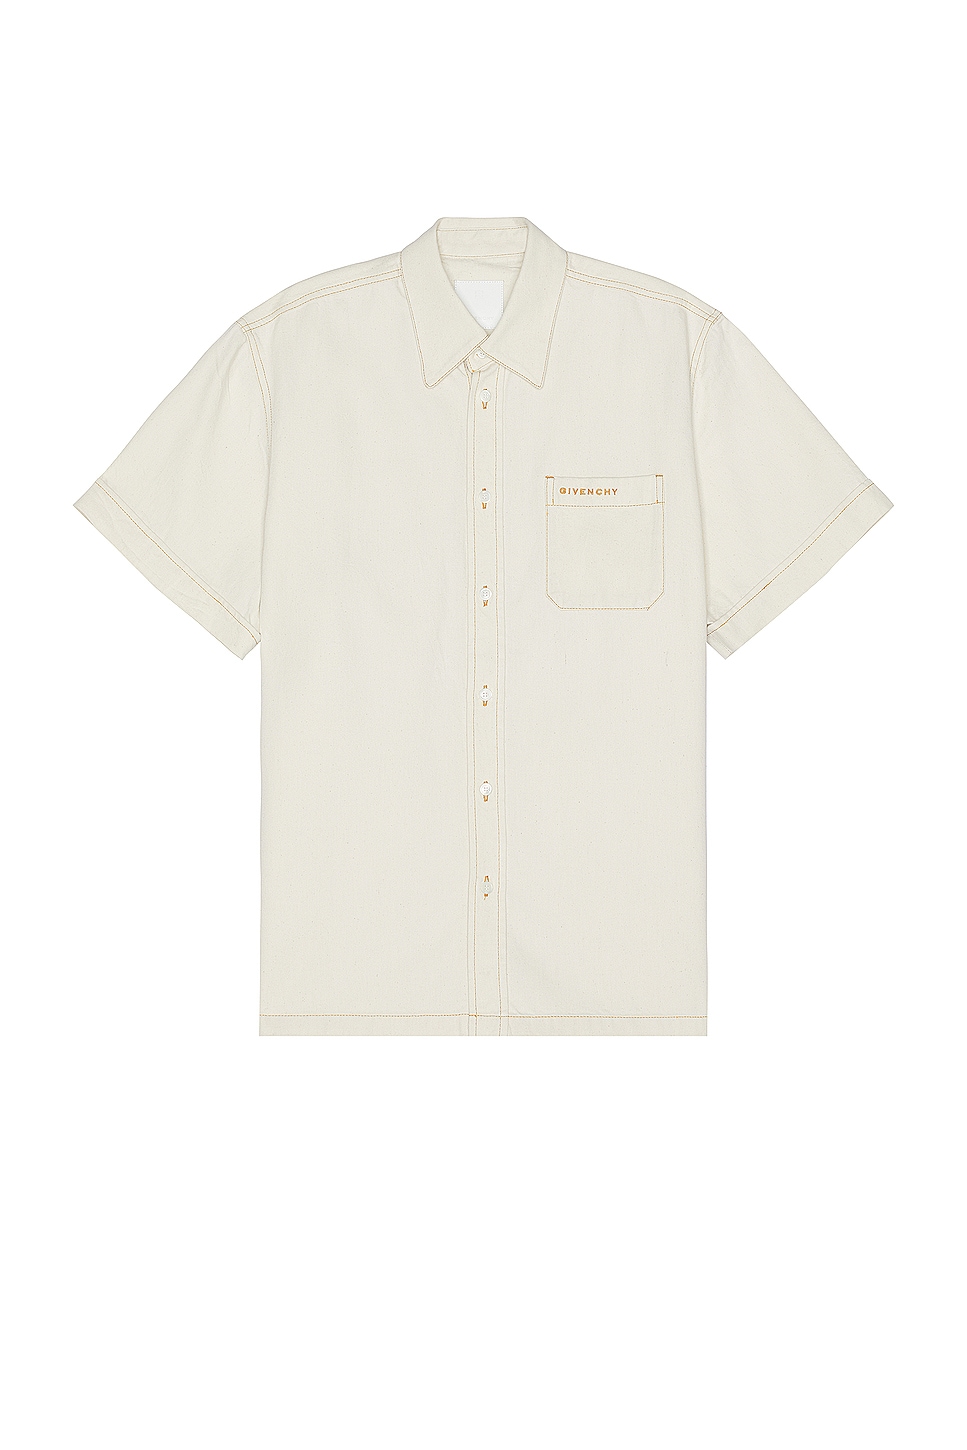 Image 1 of Givenchy Short Sleeve Shirt in Greige